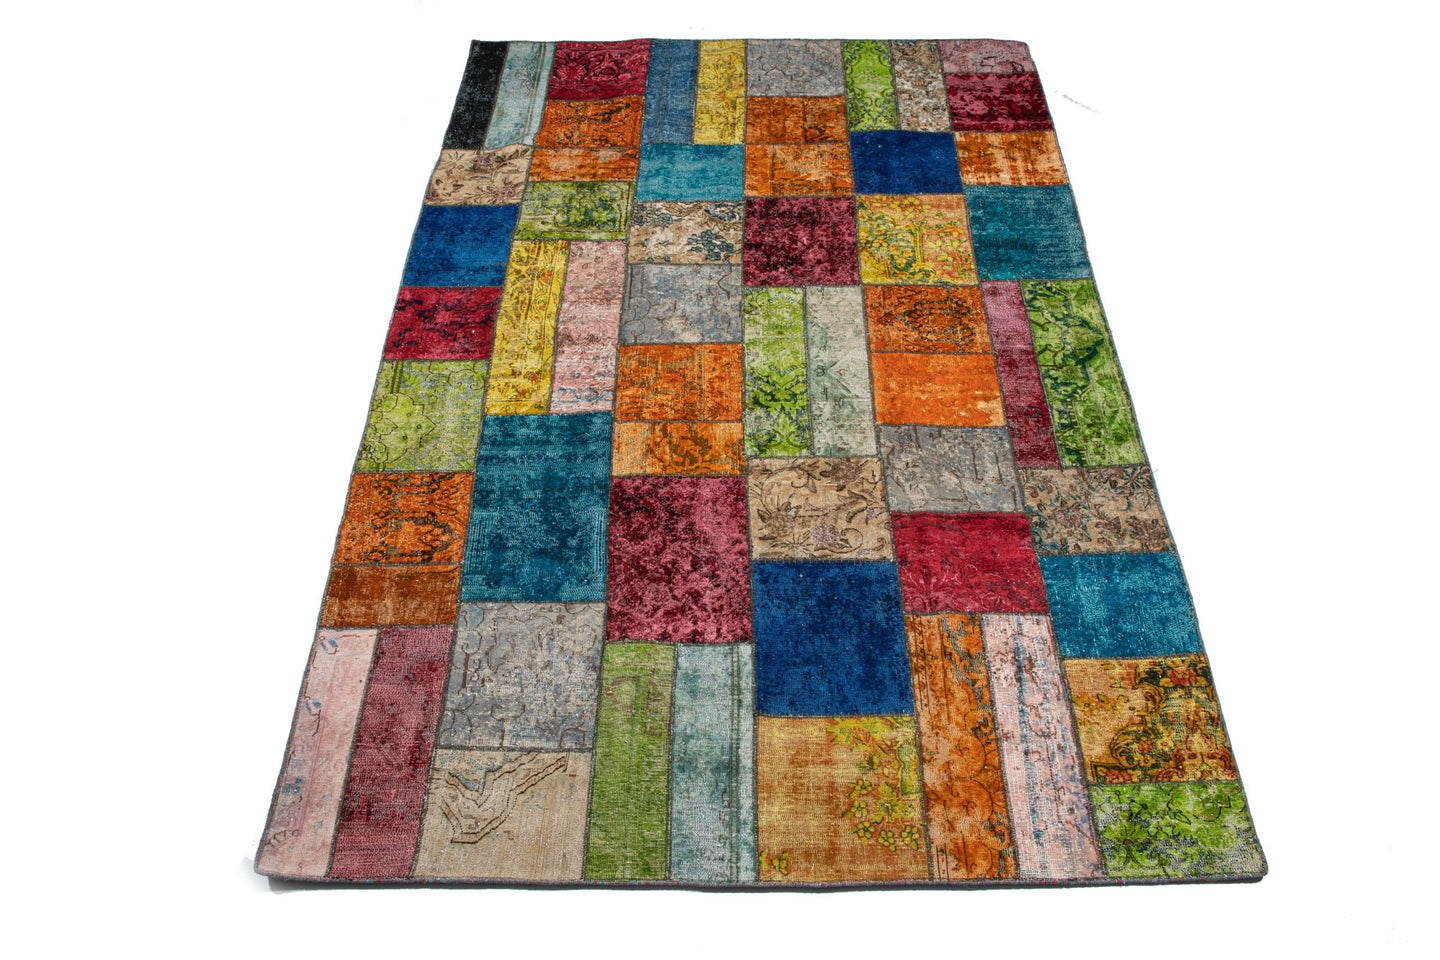 Patchwork Tappeto Carpets teppiche  Rugs Tappis CM 305x205 - Galleria Farah1970